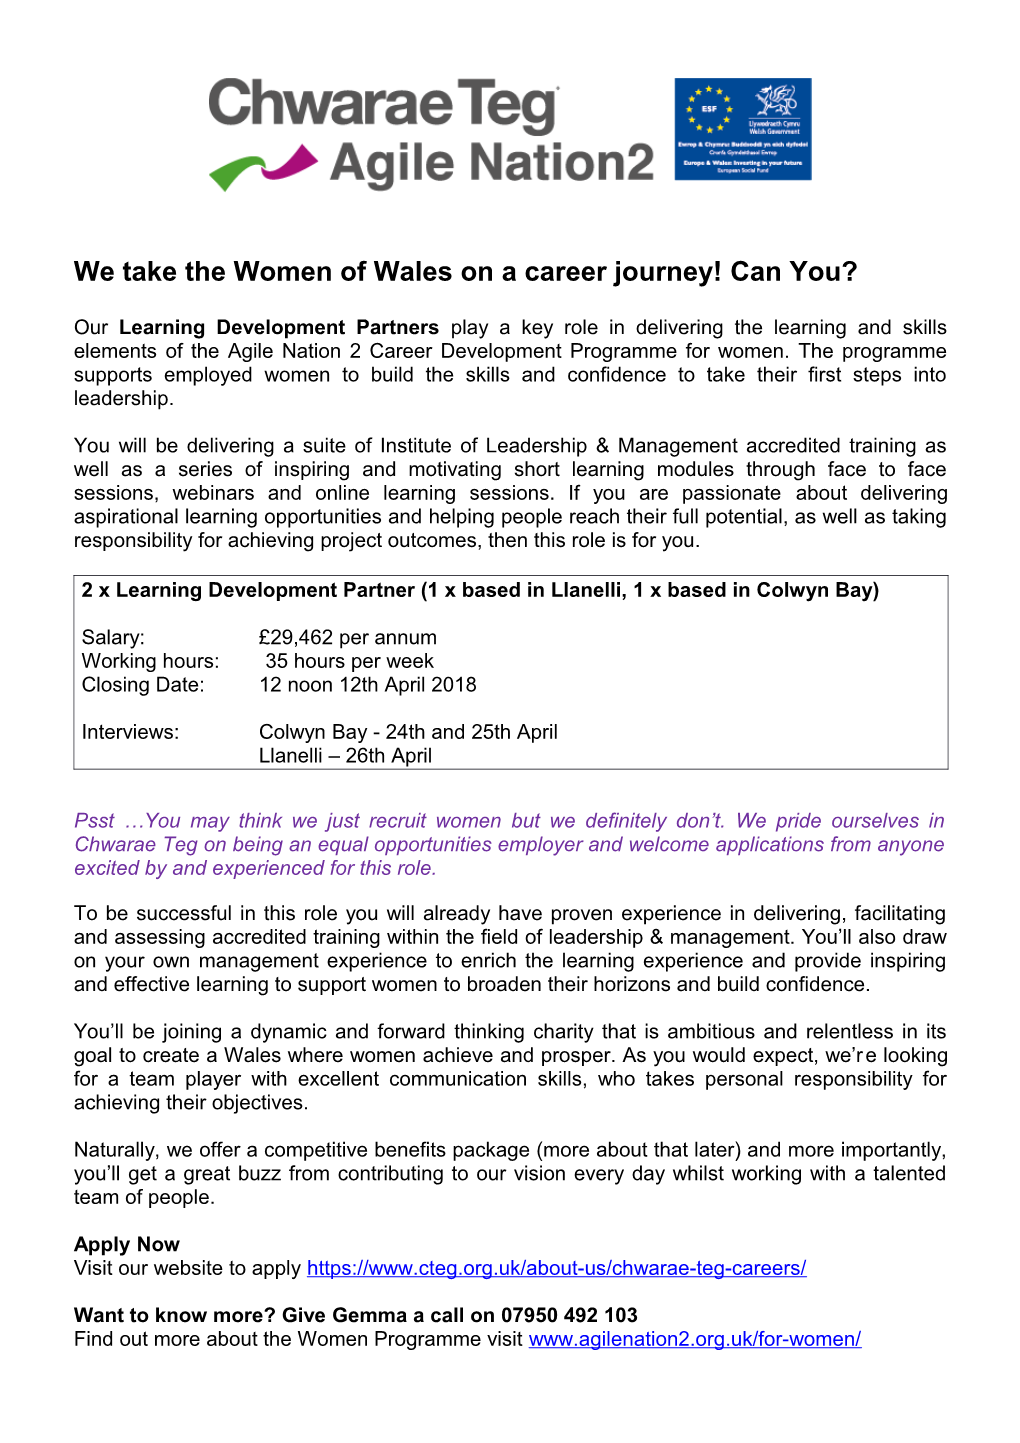 We Take the Women of Wales on a Career Journey! Can You?